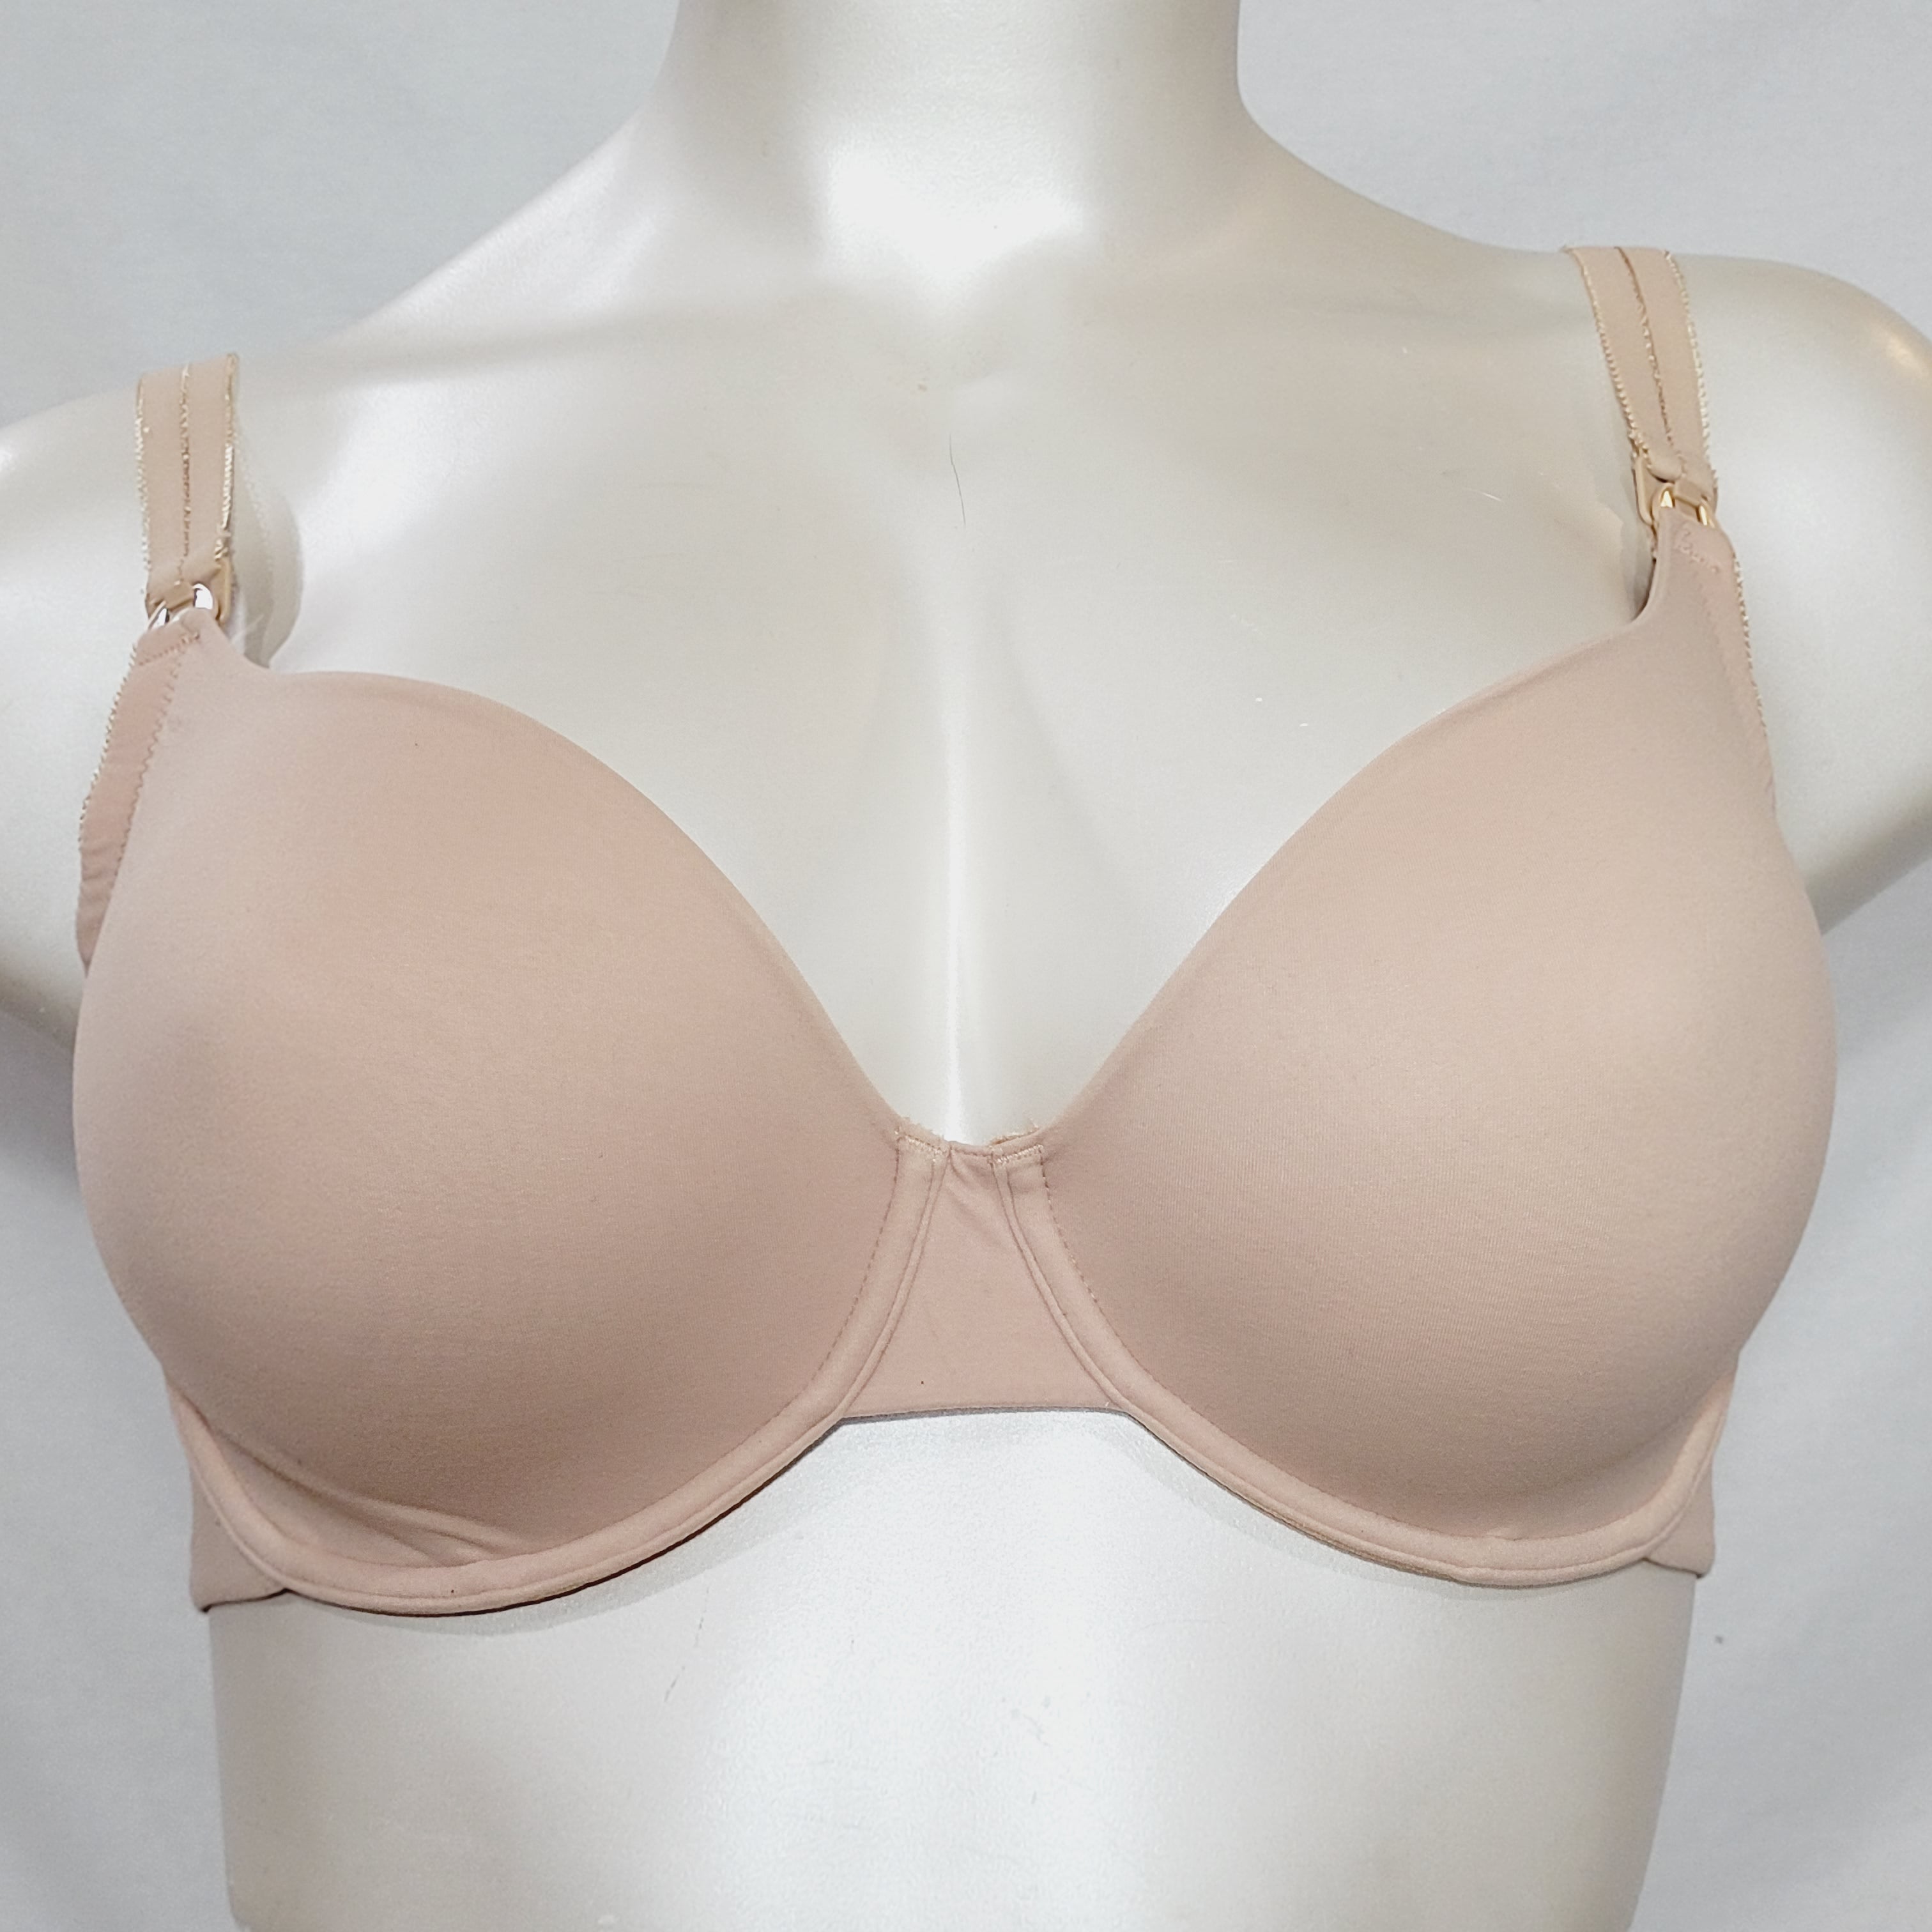  Gilligan & O'Malley Womens Comfort Nursing Bra (Small, Solid  Black) : Clothing, Shoes & Jewelry